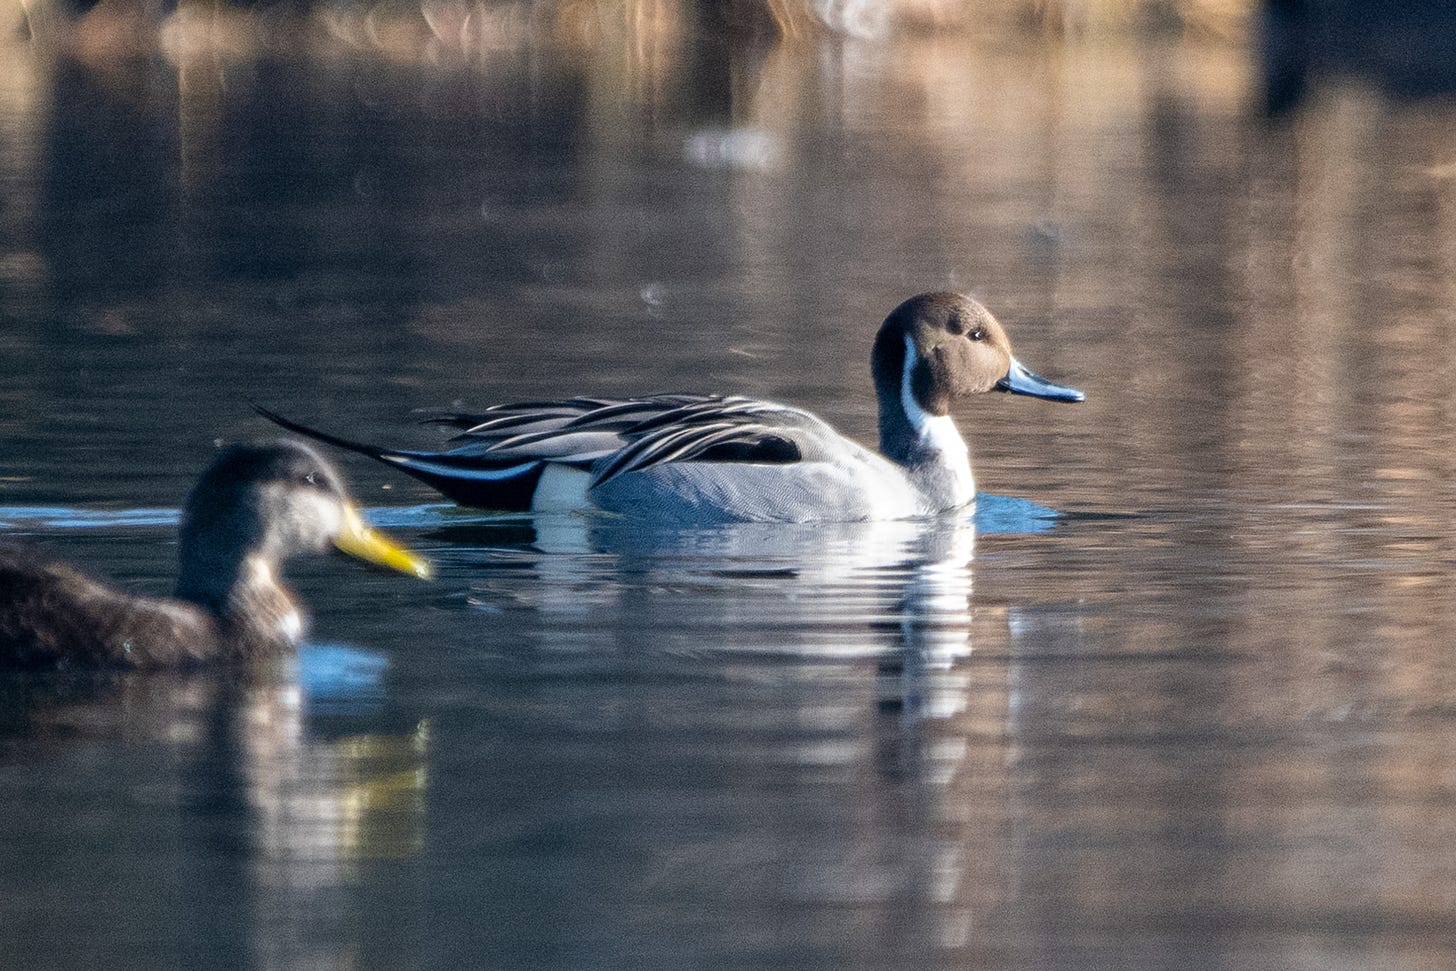 A male Northern pintail, with brown head, doll-like eyes, and a distinctive snakelike white neckline, swims to the right